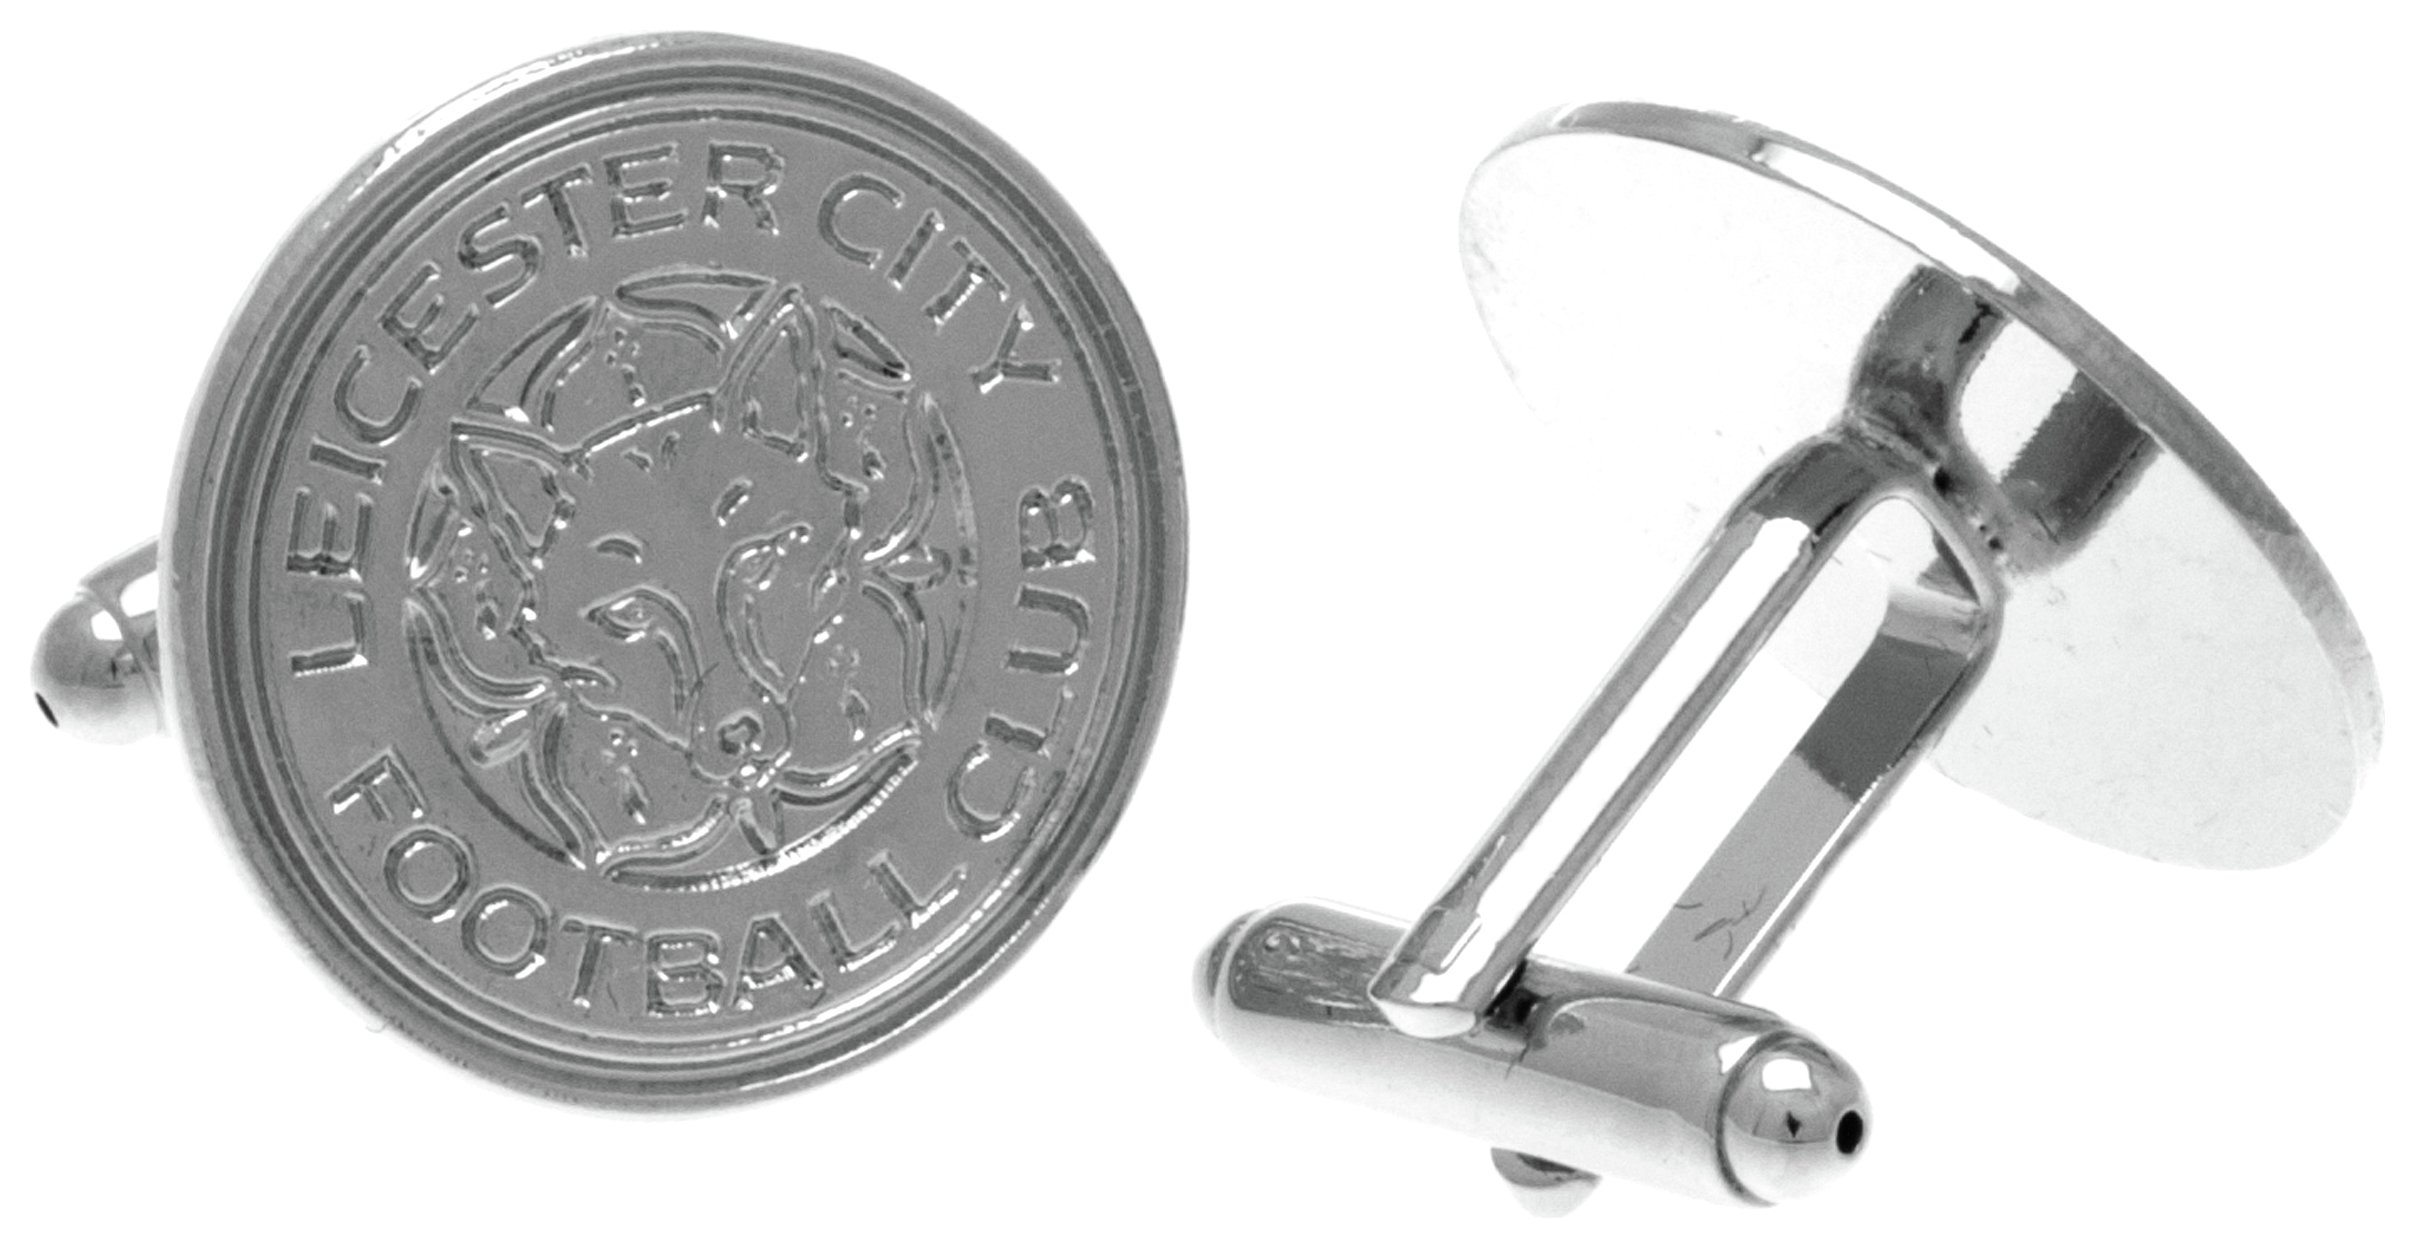 Silver Plated Leicester City Crest Cufflinks